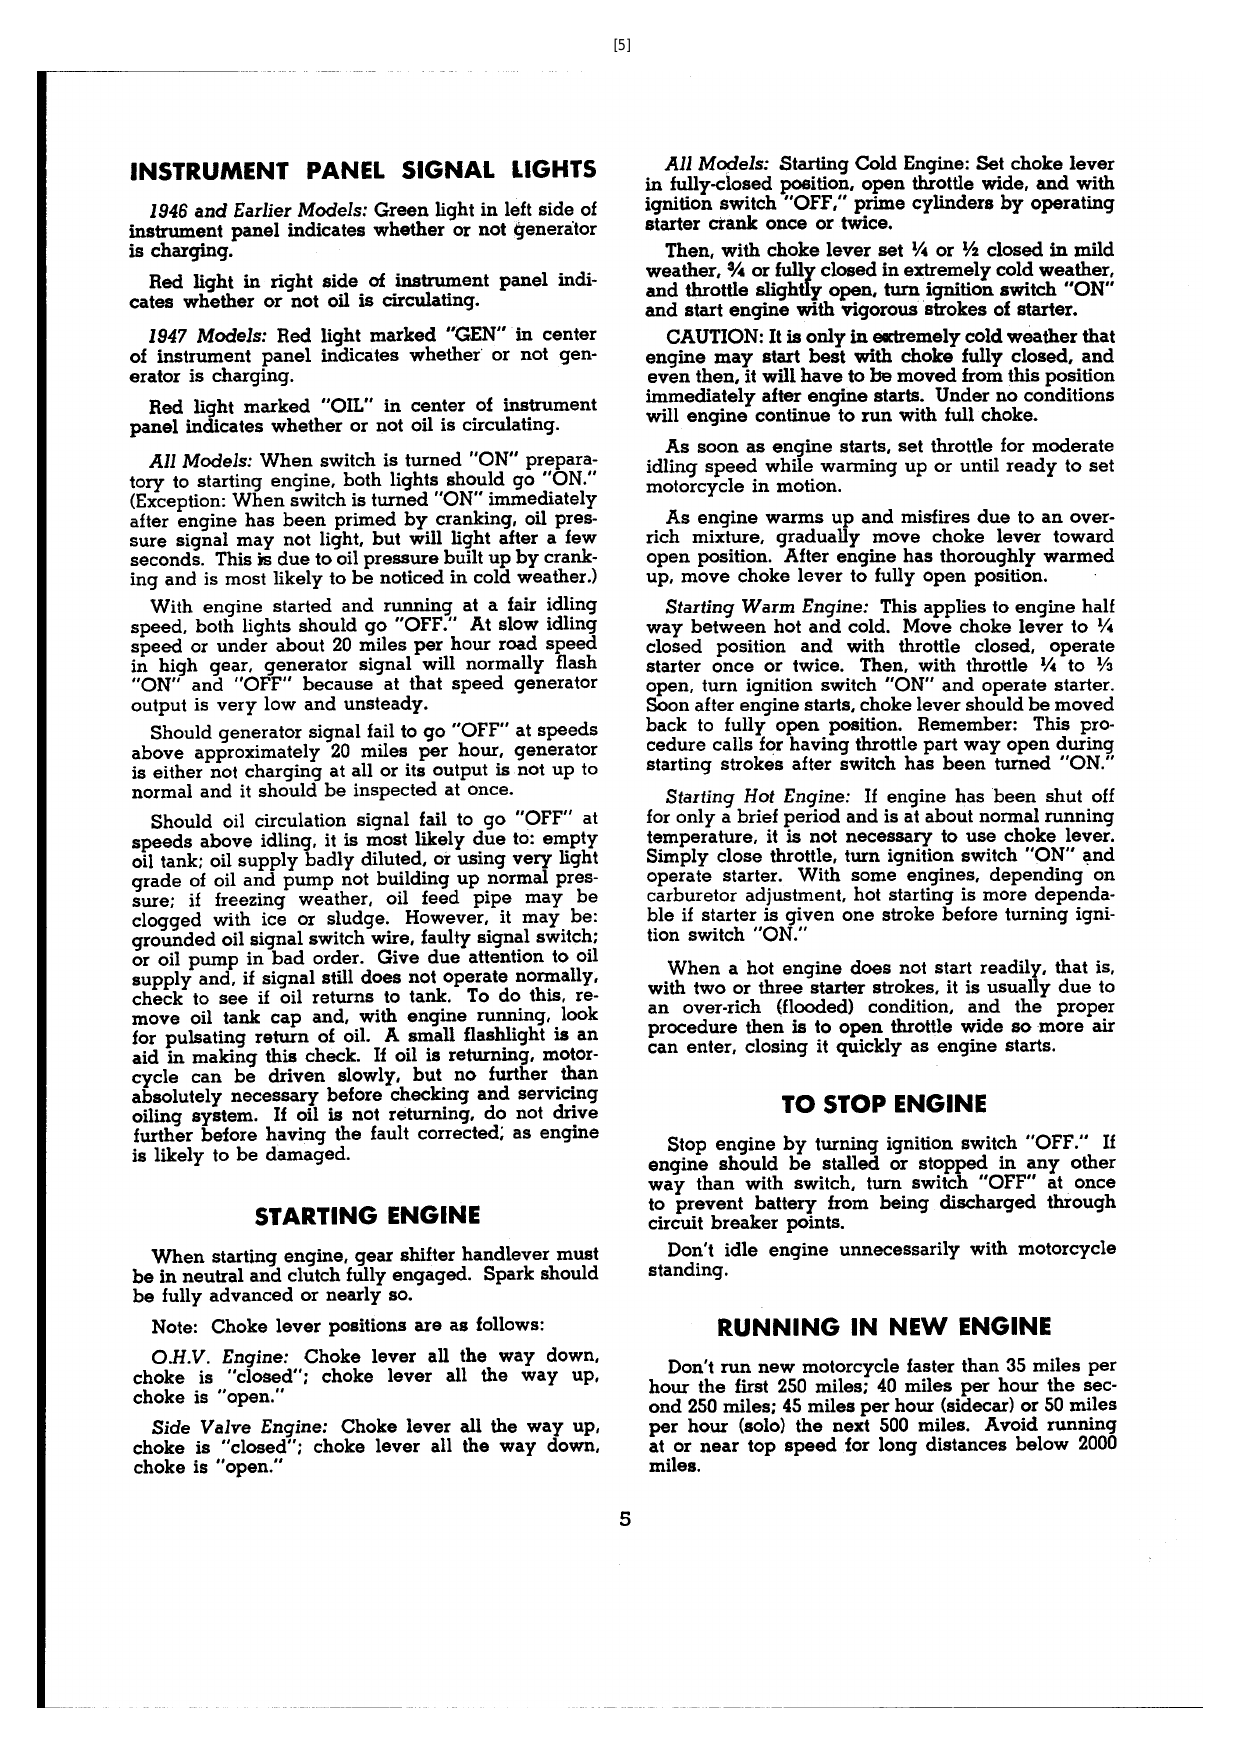 1940-1947 Harley-Davidson Knucklehead, Flathead service manual Preview image 5